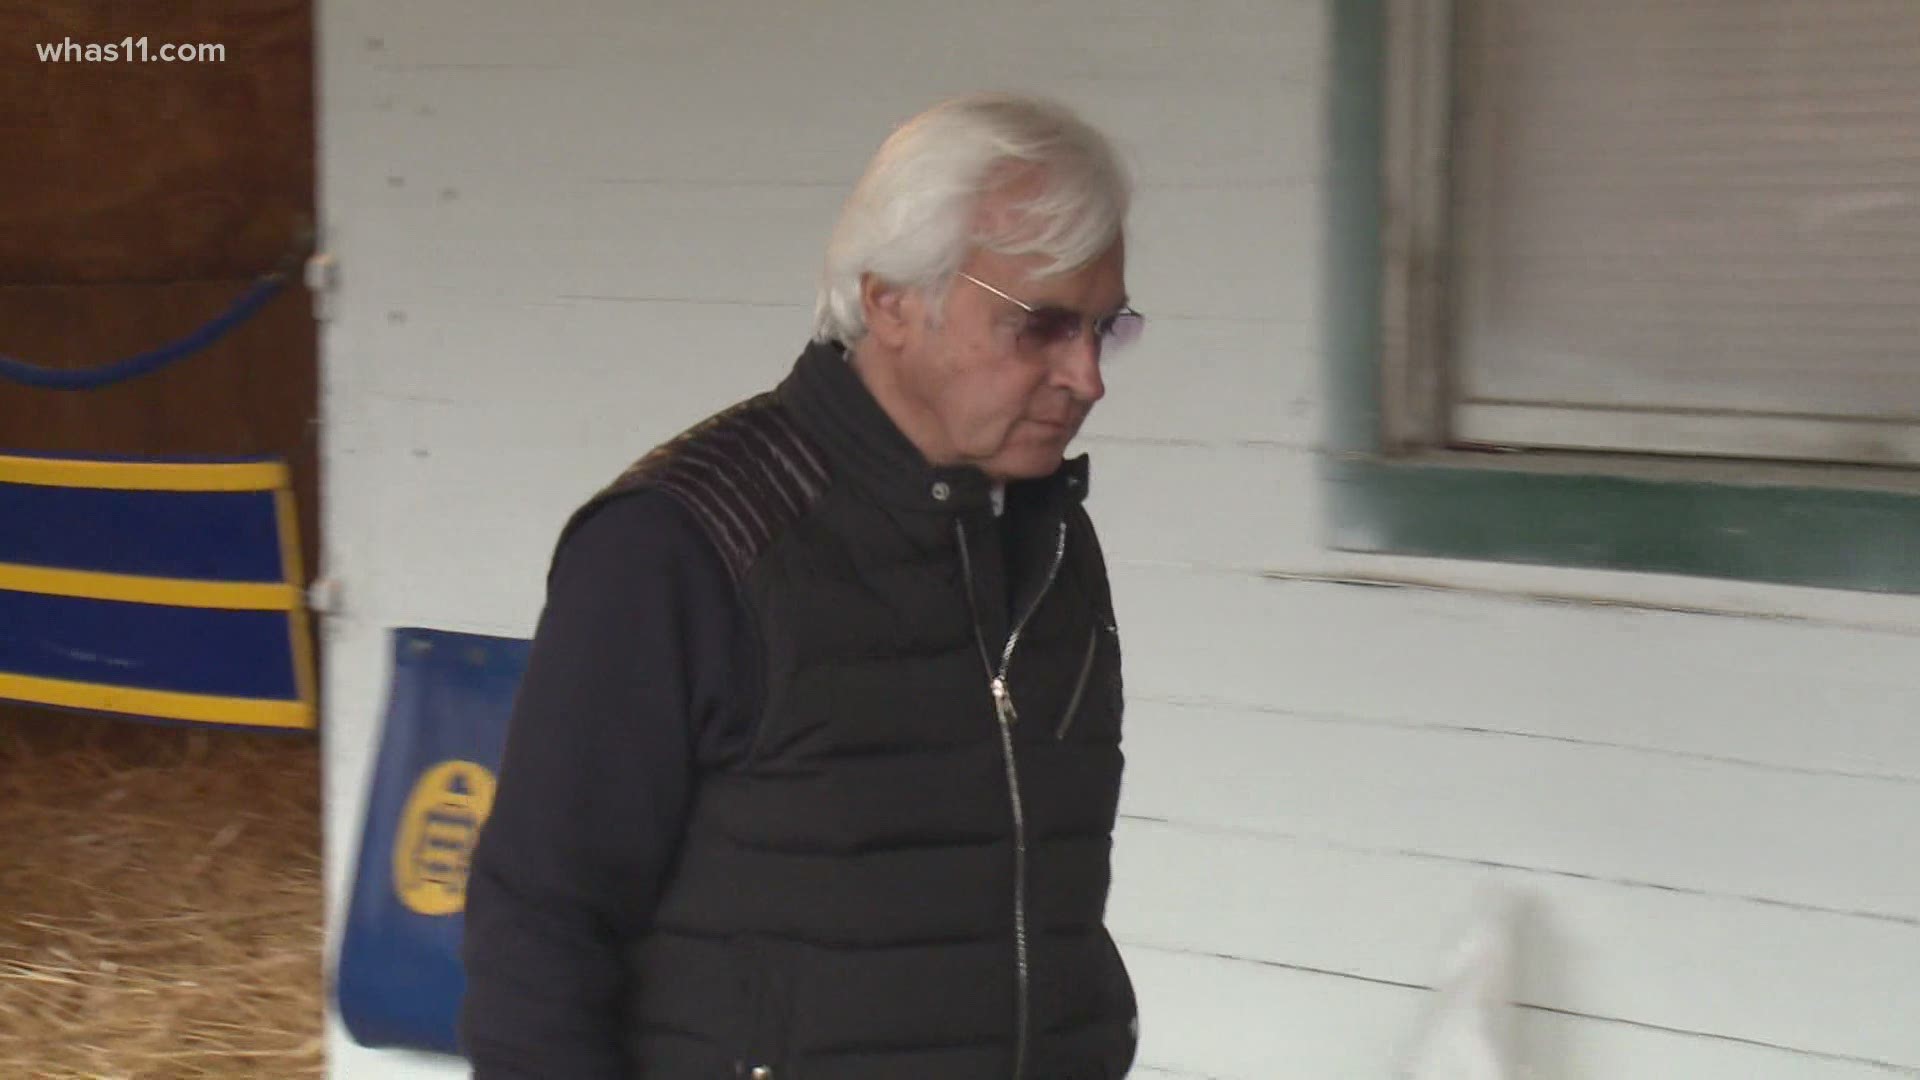 Bob Baffert has now sued to the New York Racing Association for improperly suspending him and without due process.